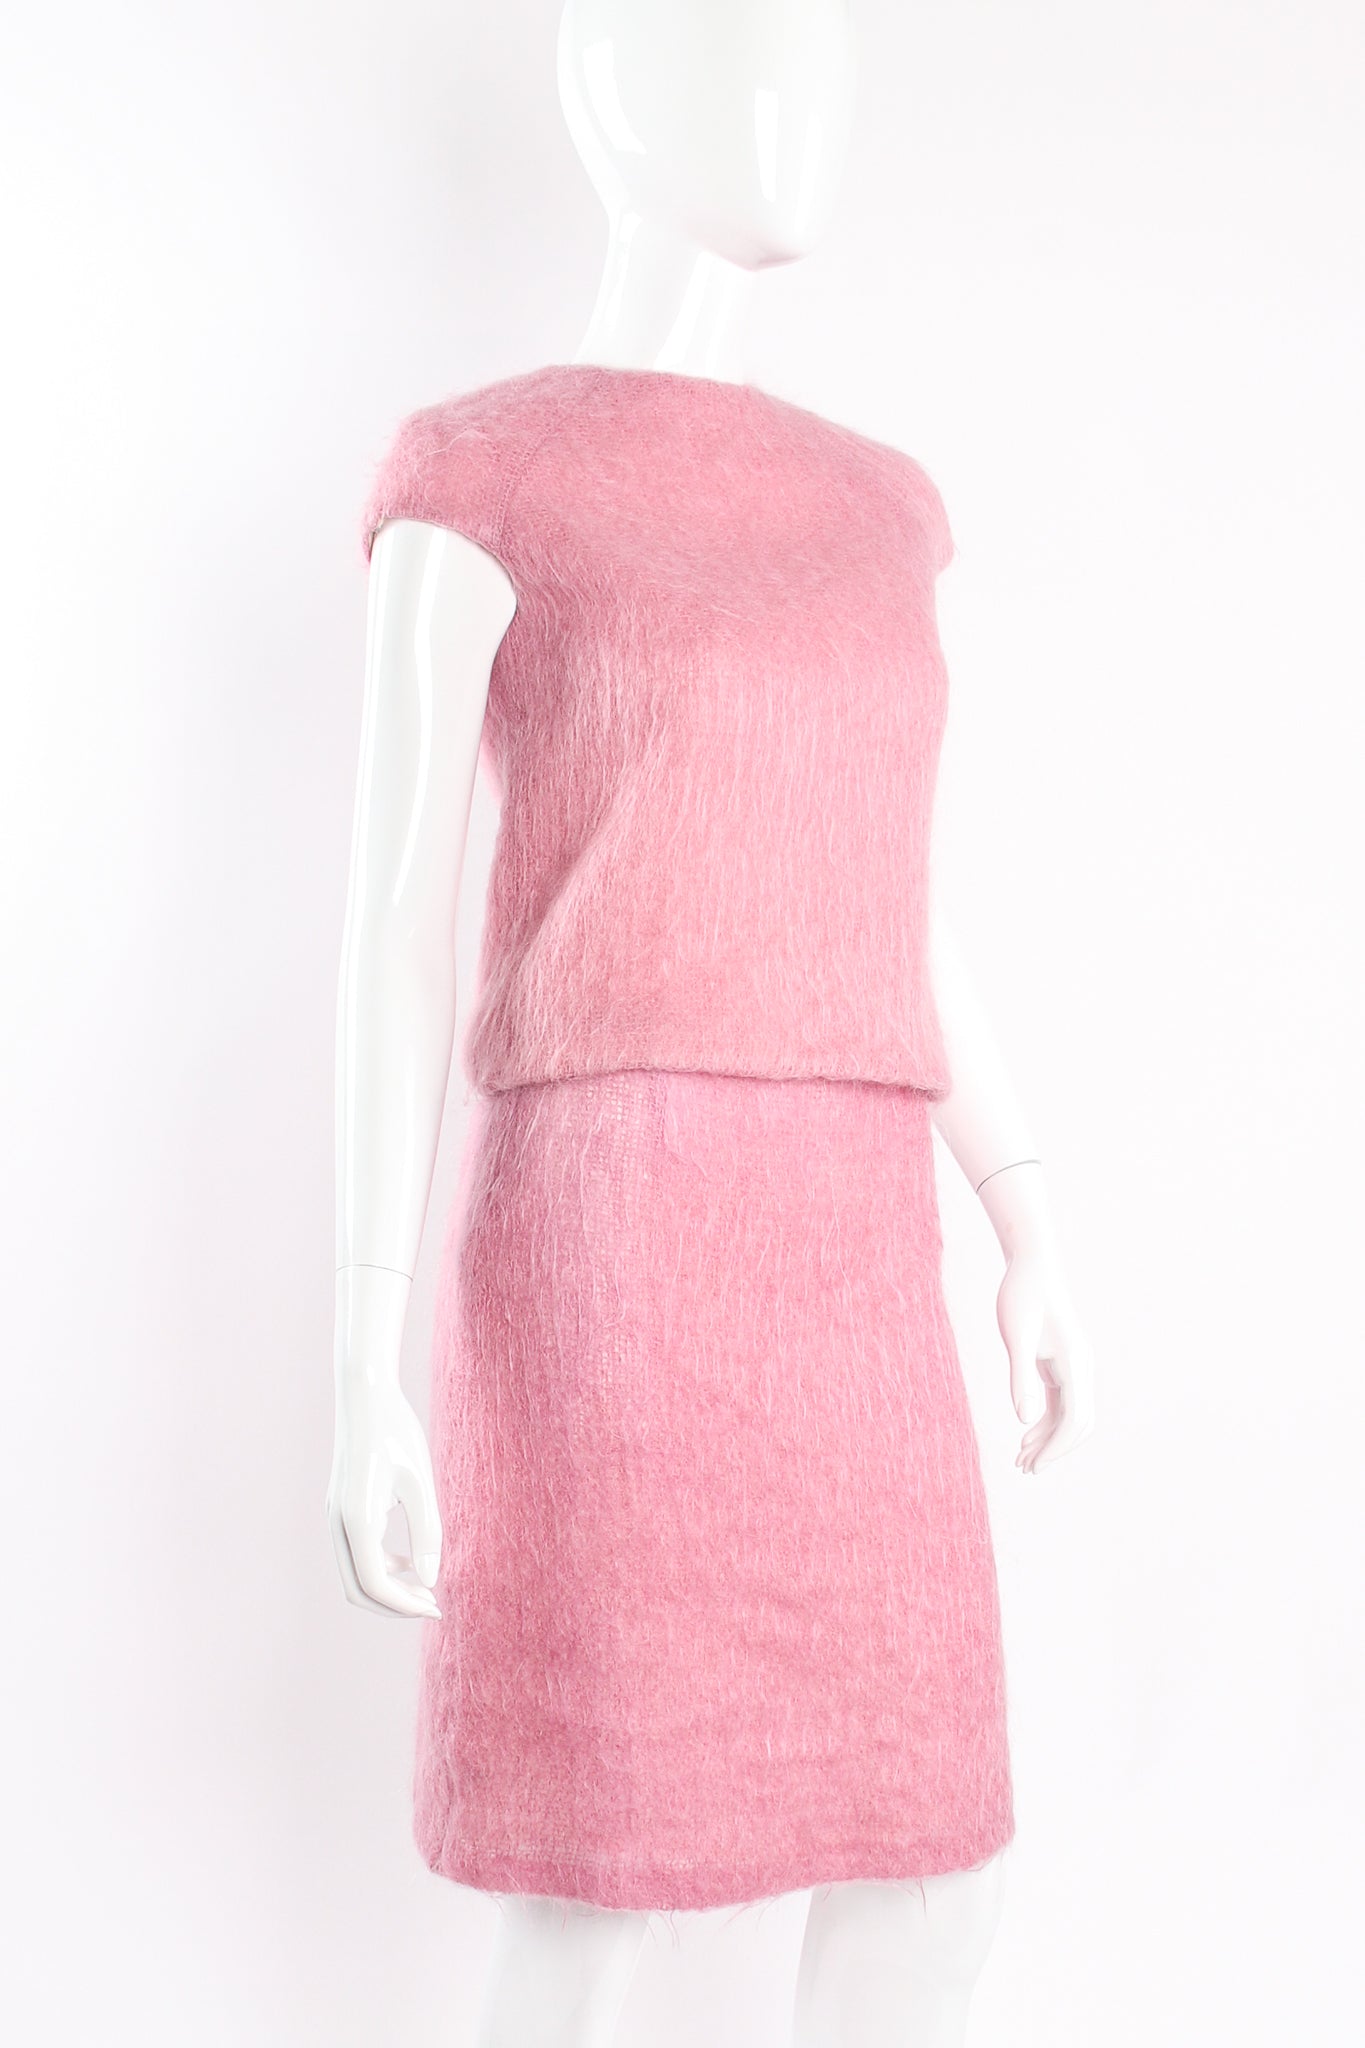 Paul & Joe Cotton Candy Fuzzy Mohair Top & Skirt Set on mannequin crop at Recess Los Angeles